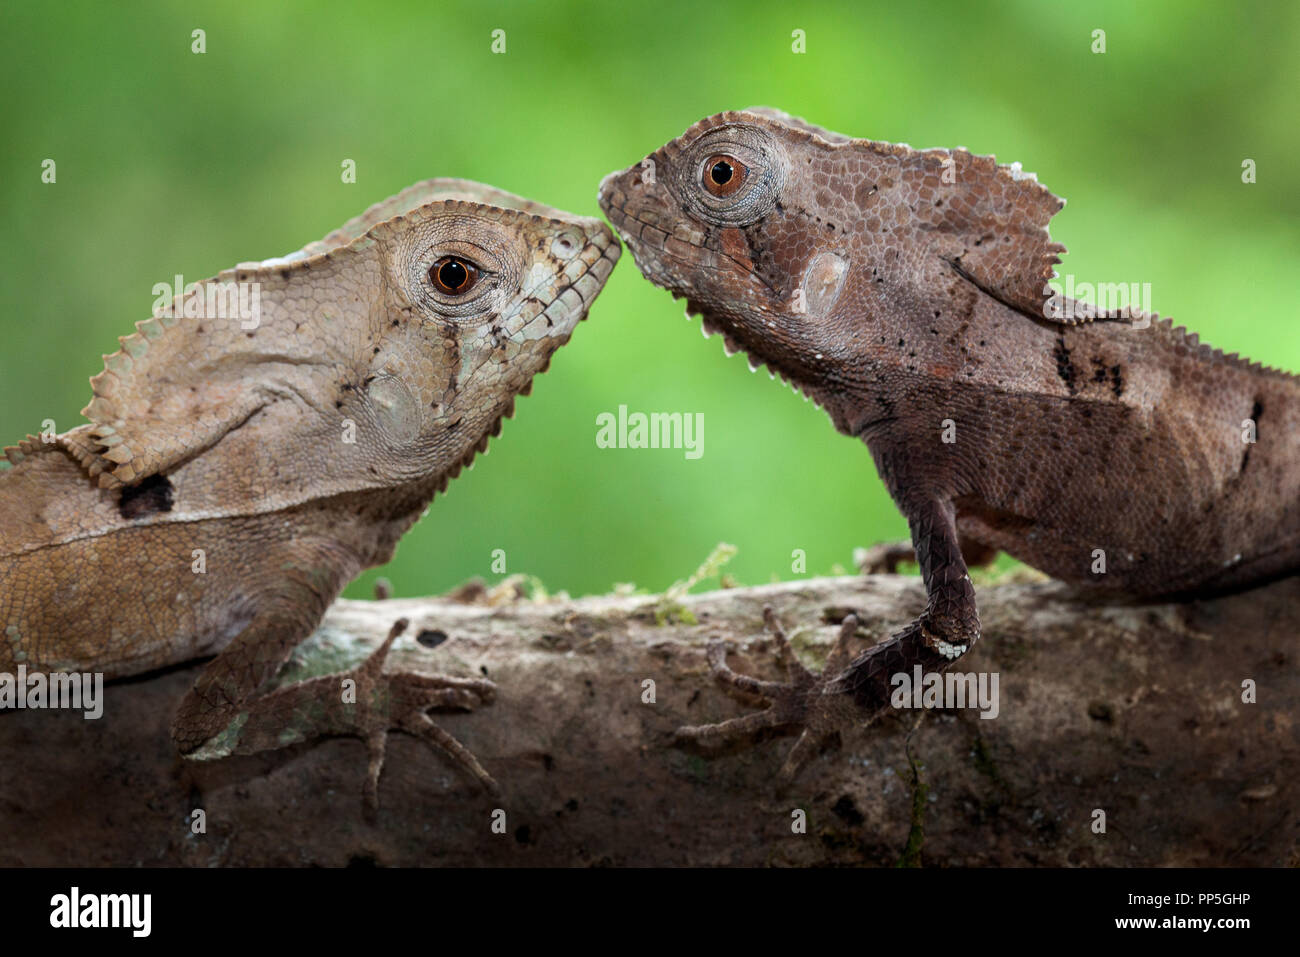 A couple of helmeted basilisks photographed in Costa Rica Stock Photo